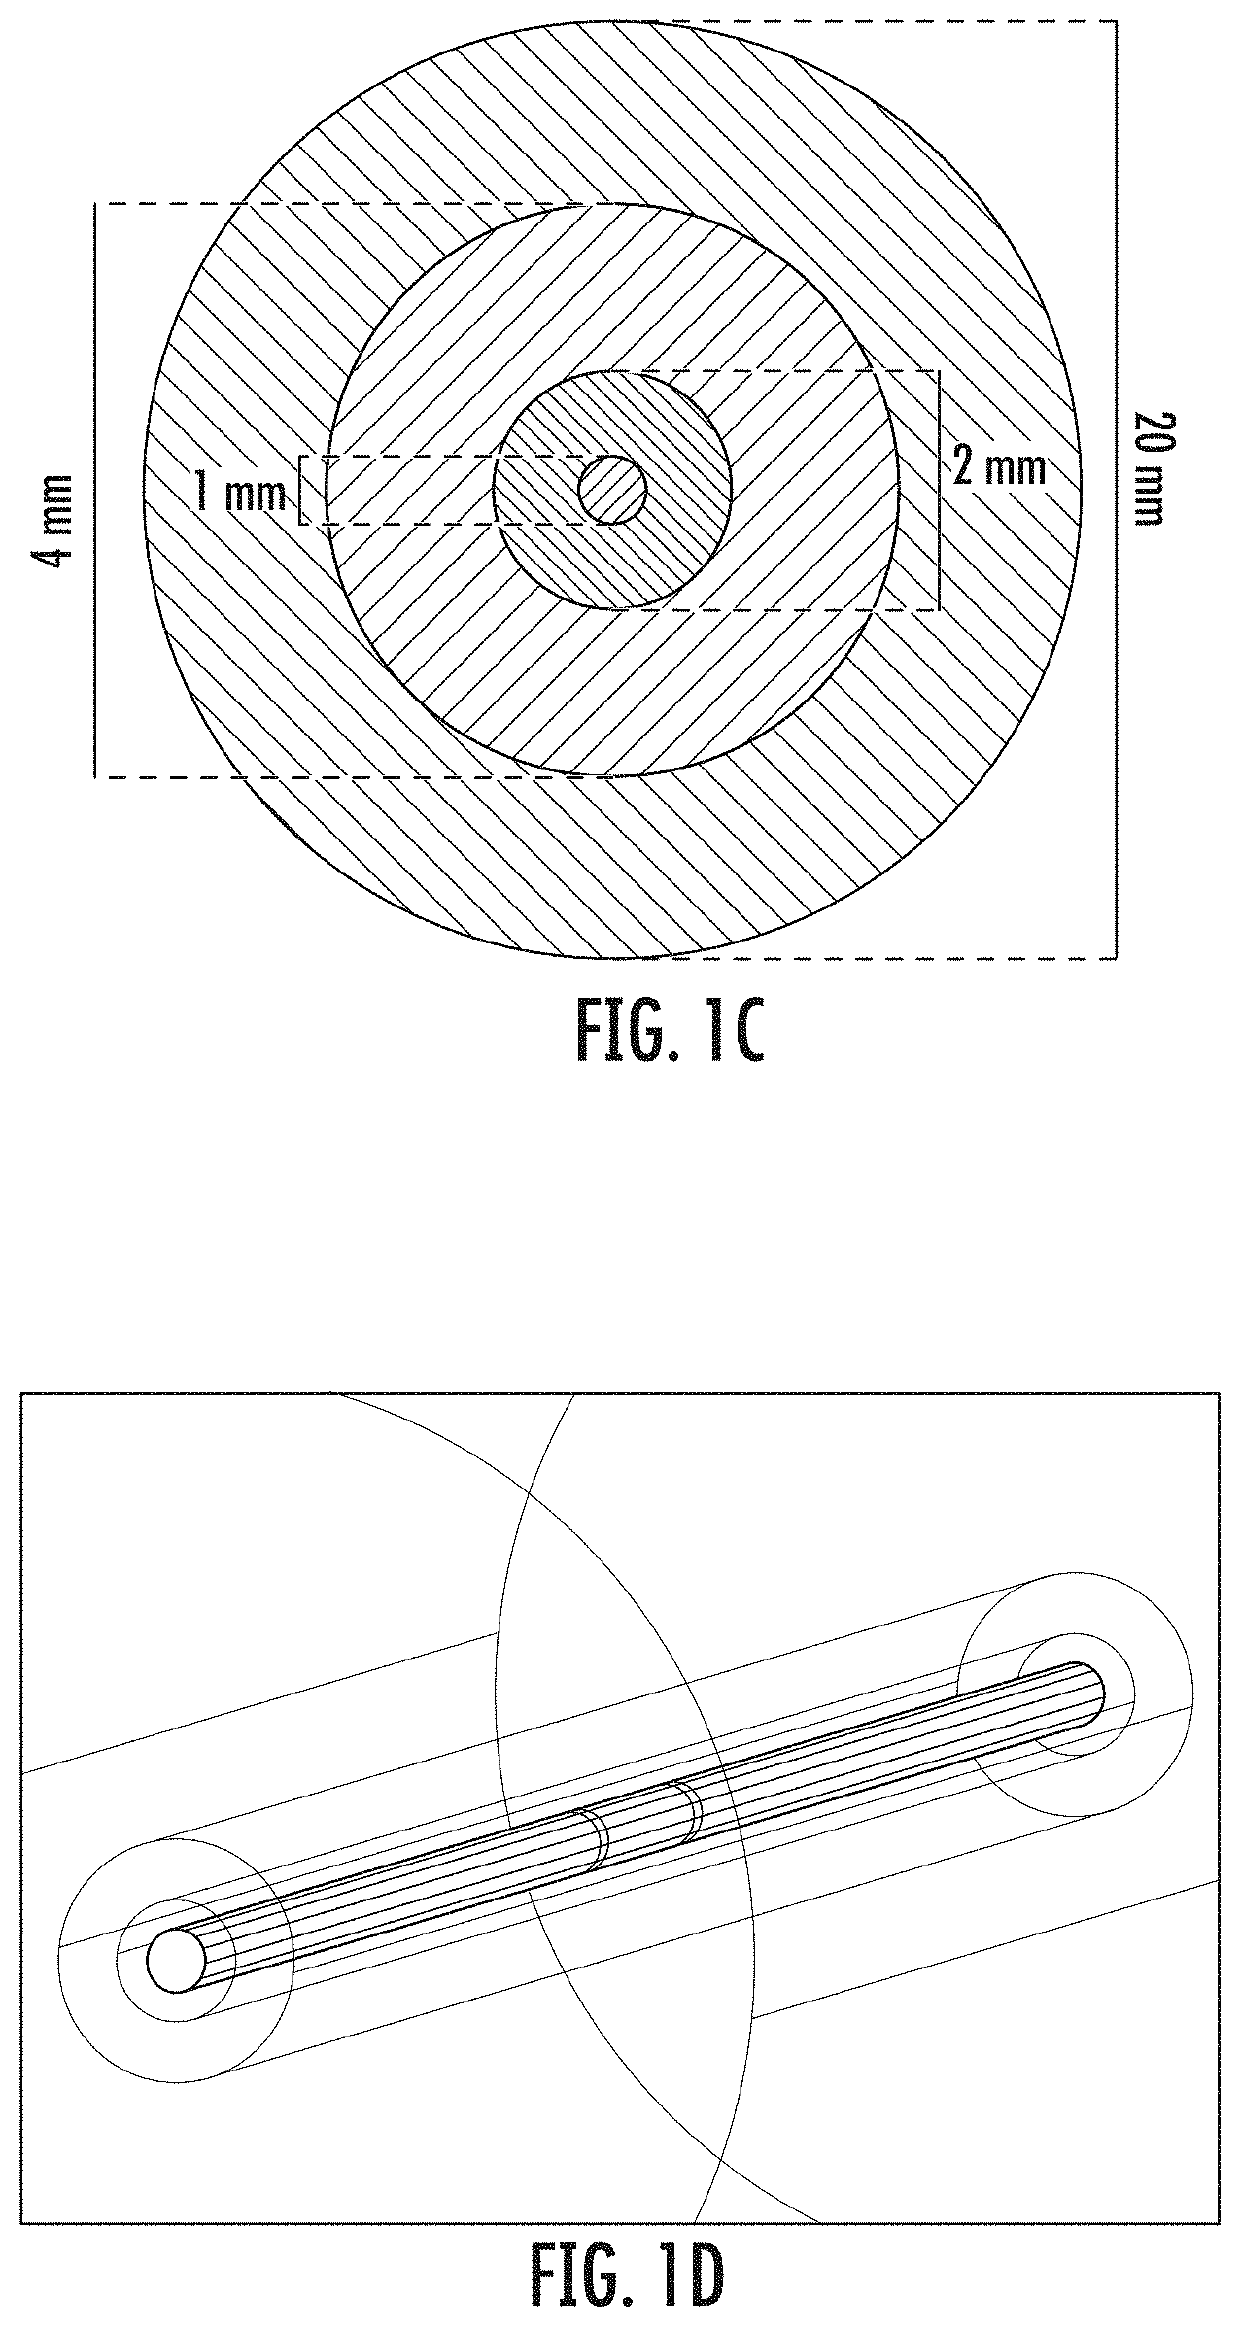 Device and method for electroporation based treatment of stenosis of a tubular body part